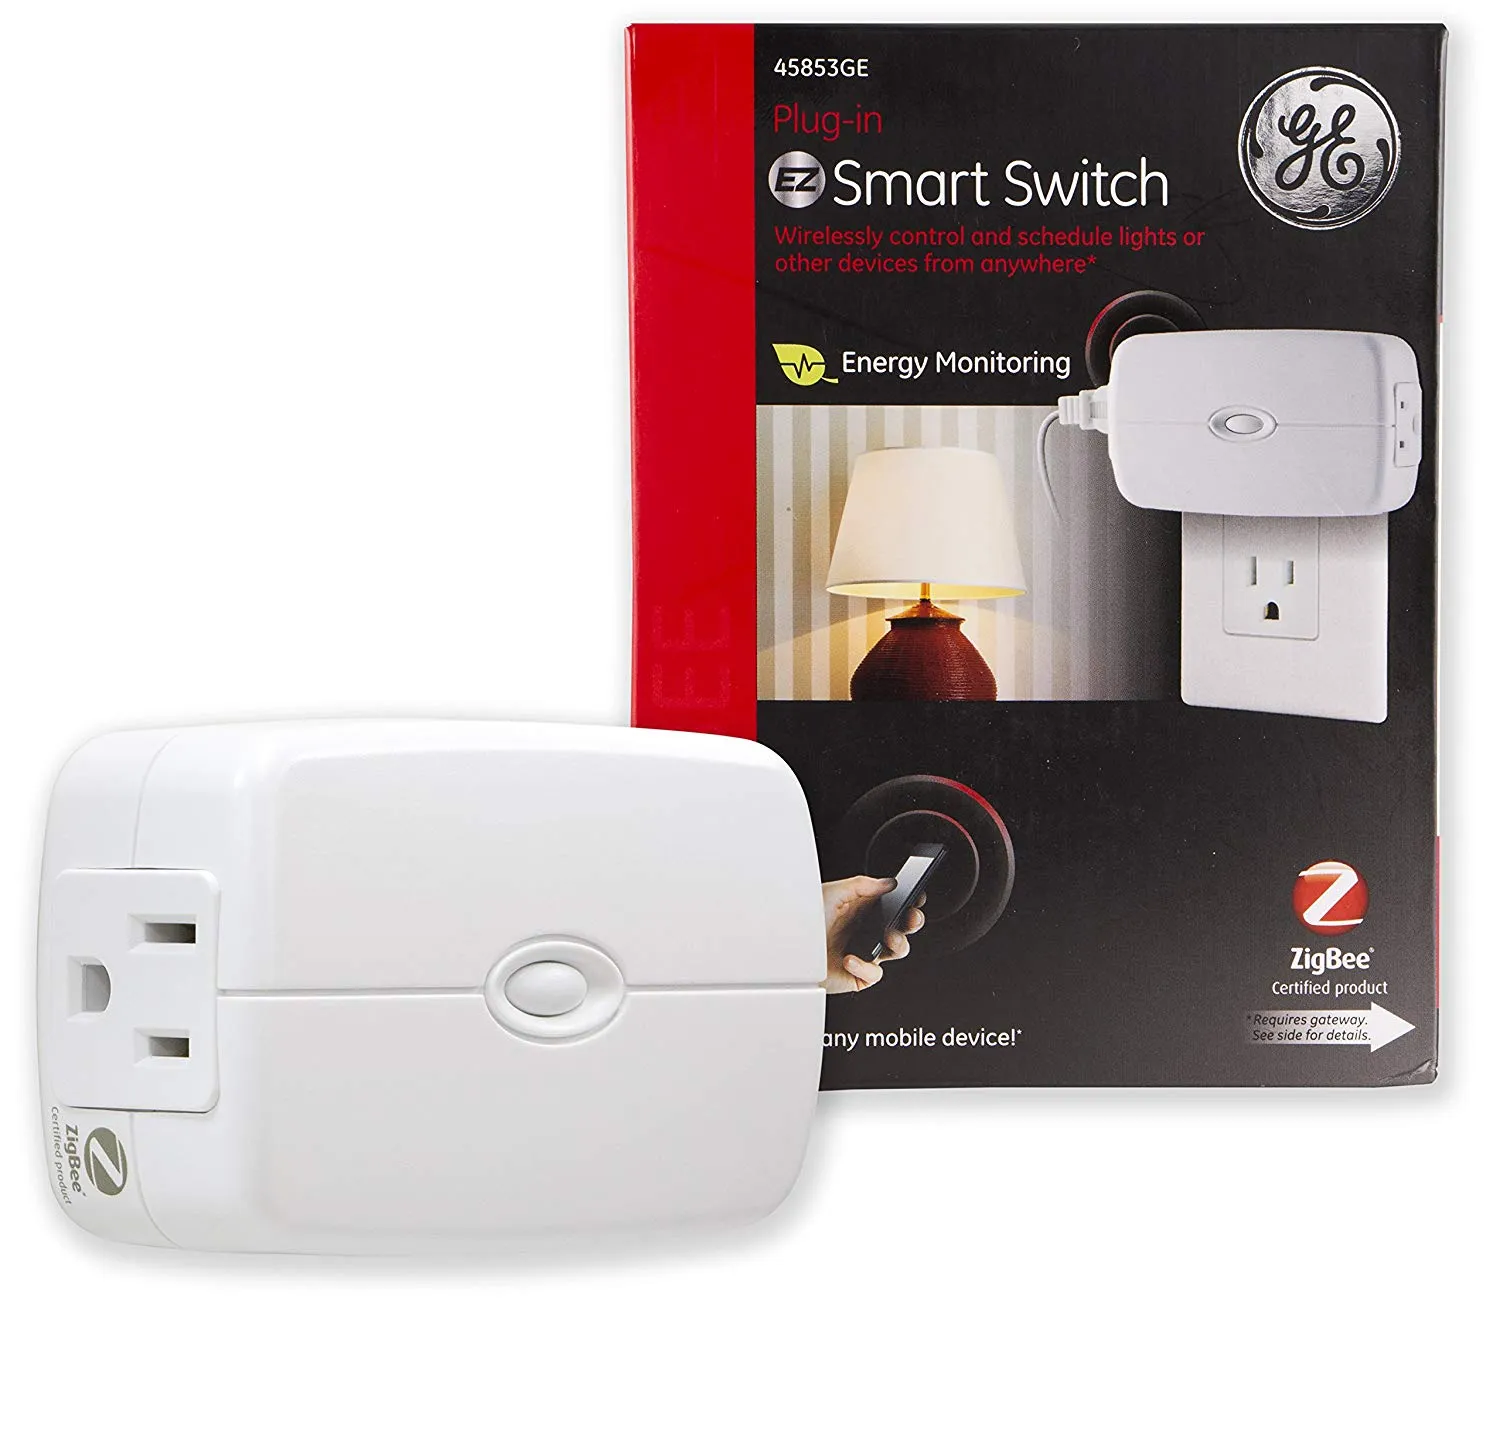 Plug-in Smart Switch